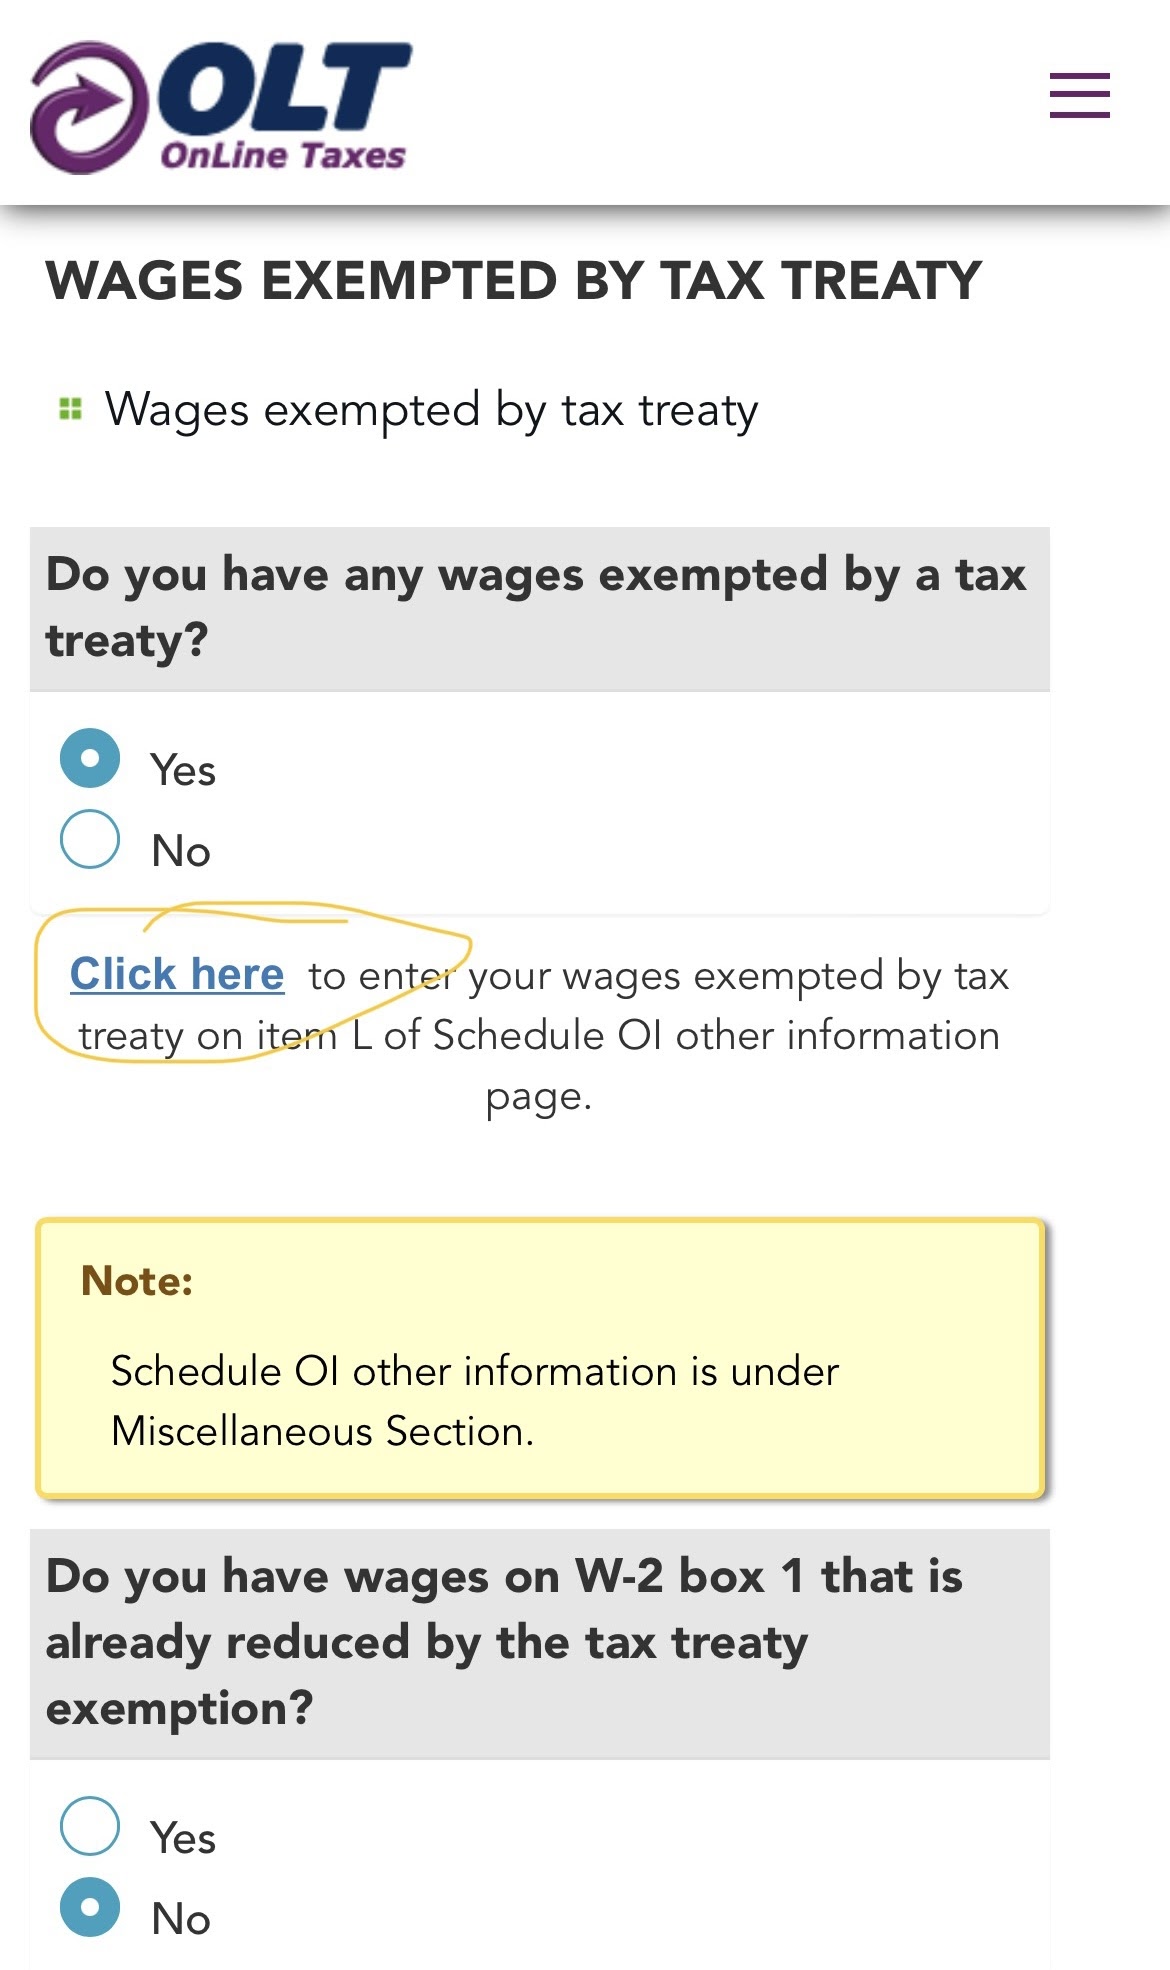 Wages exempted by tax treaty